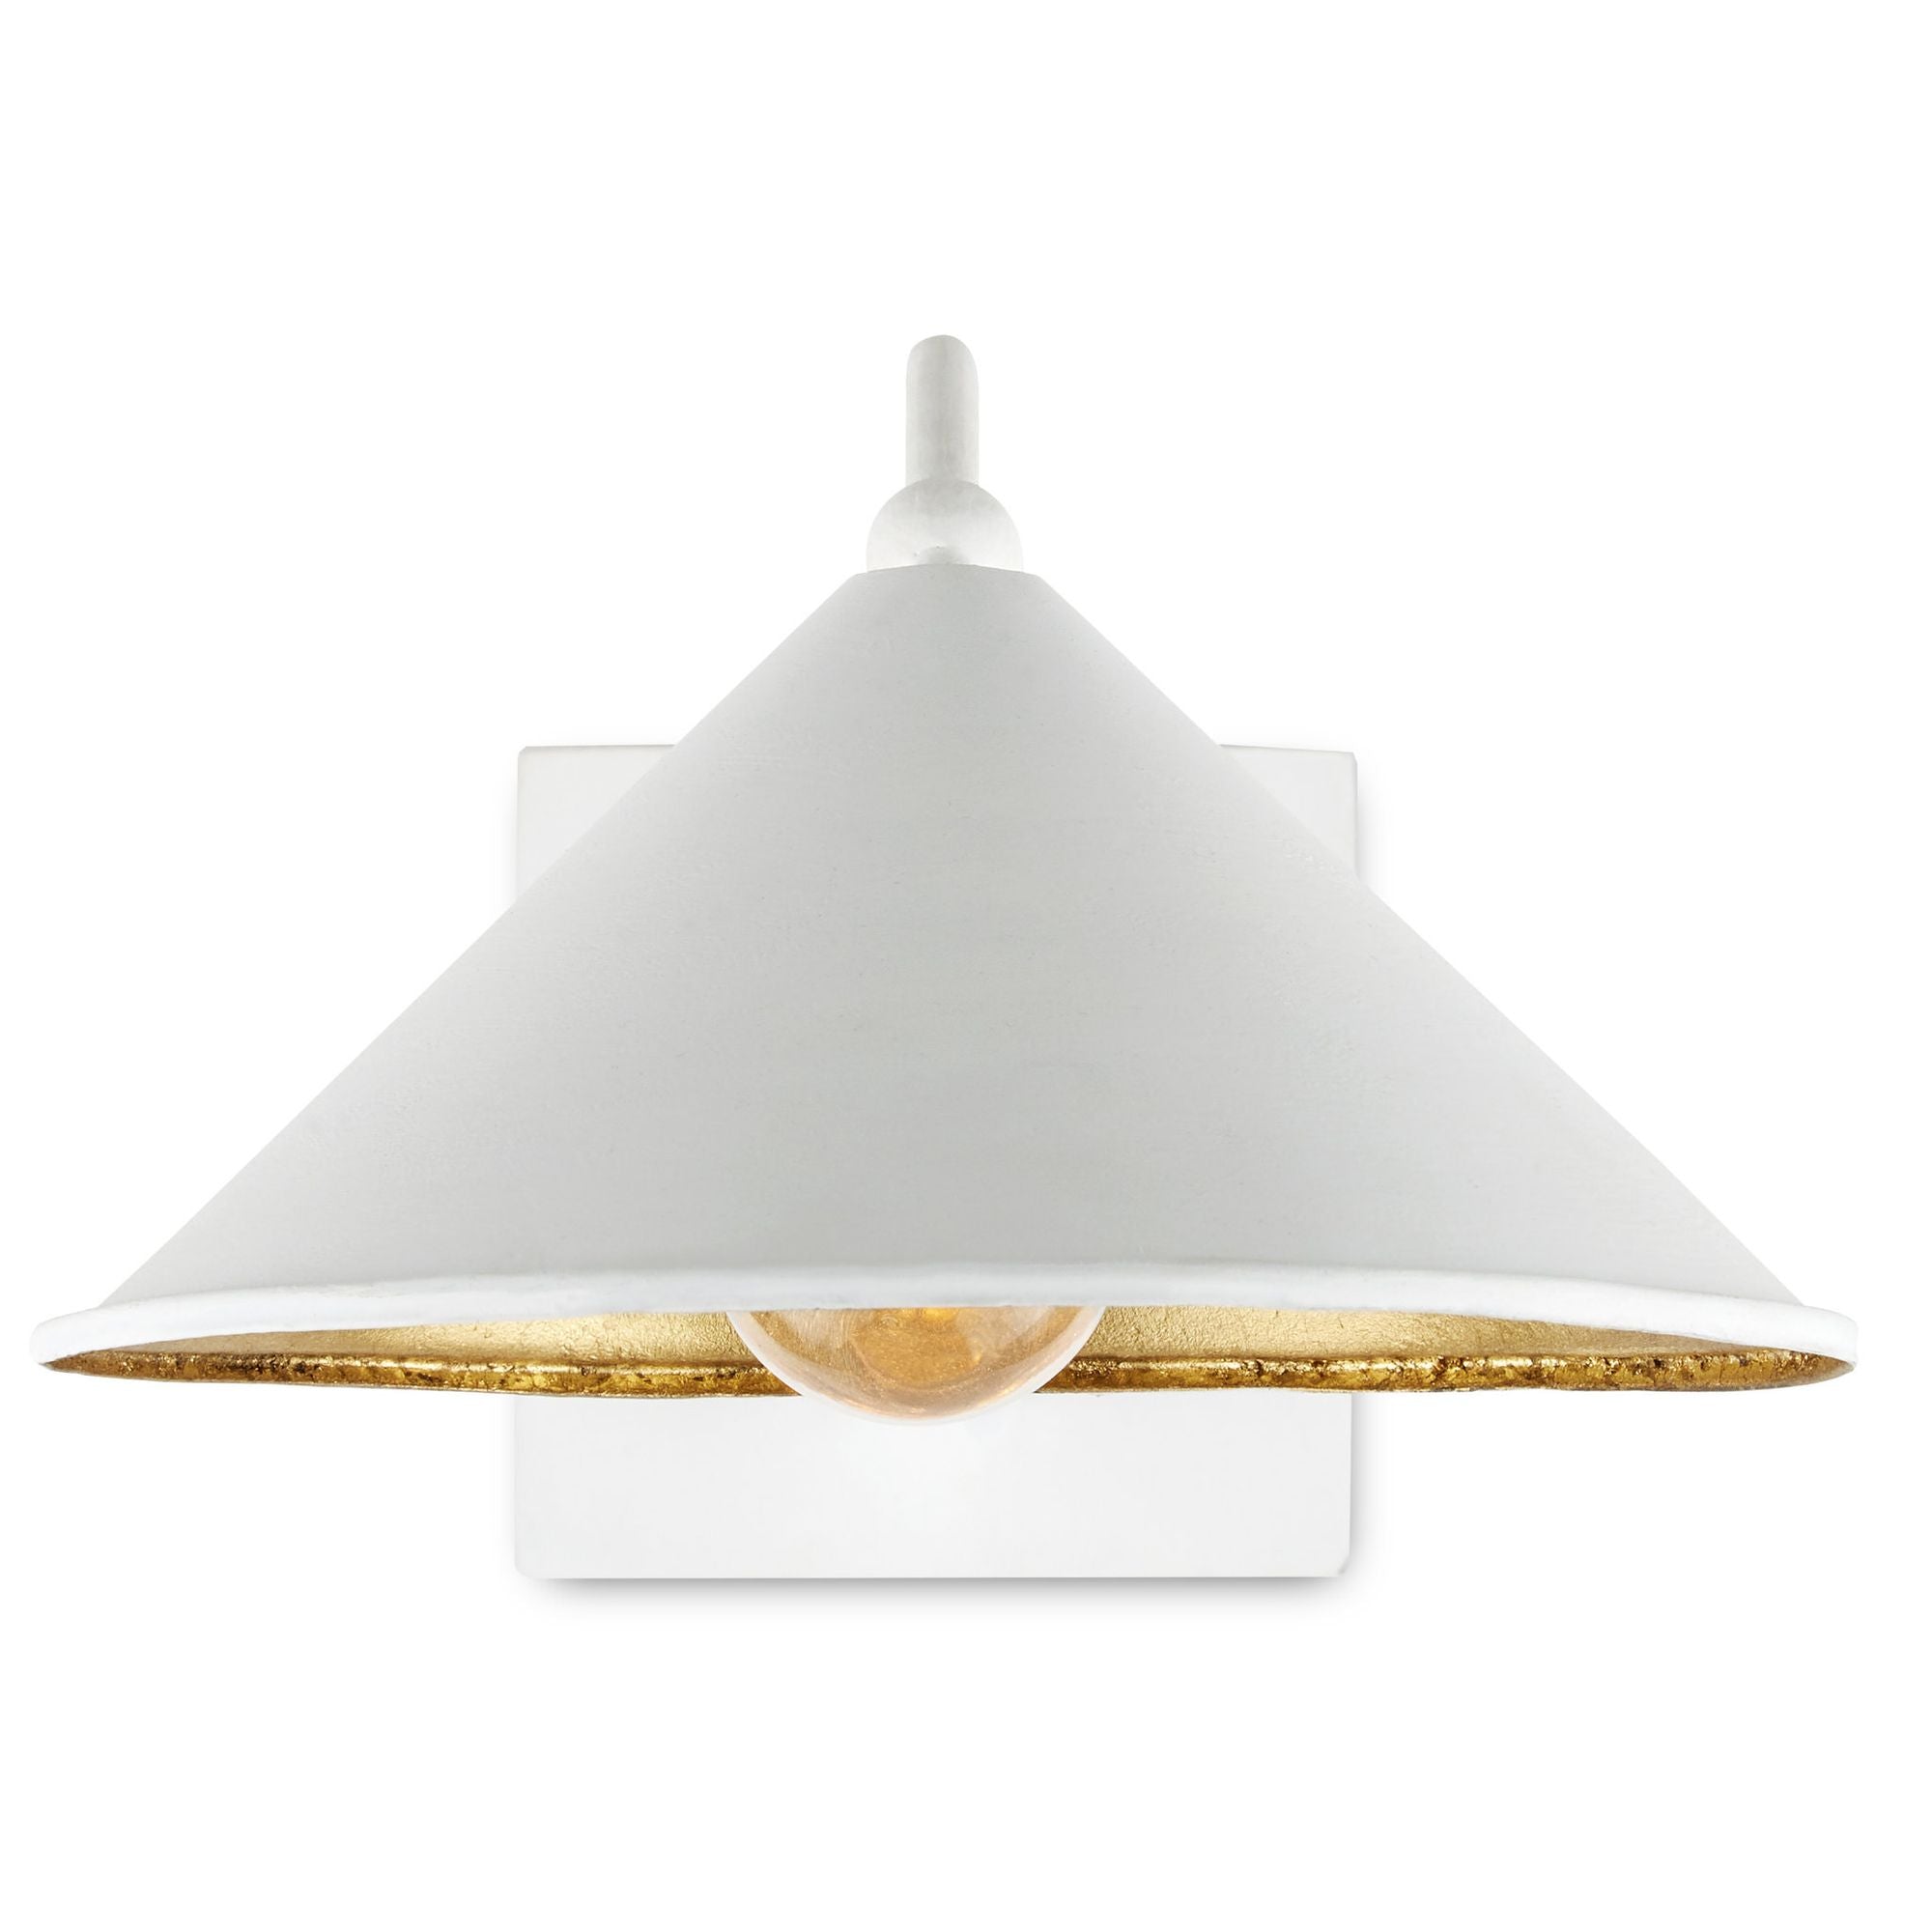 Serpa Whilte Single Swing-Arm Wall Sconce - Gesso White/Contemporary Gold Leaf